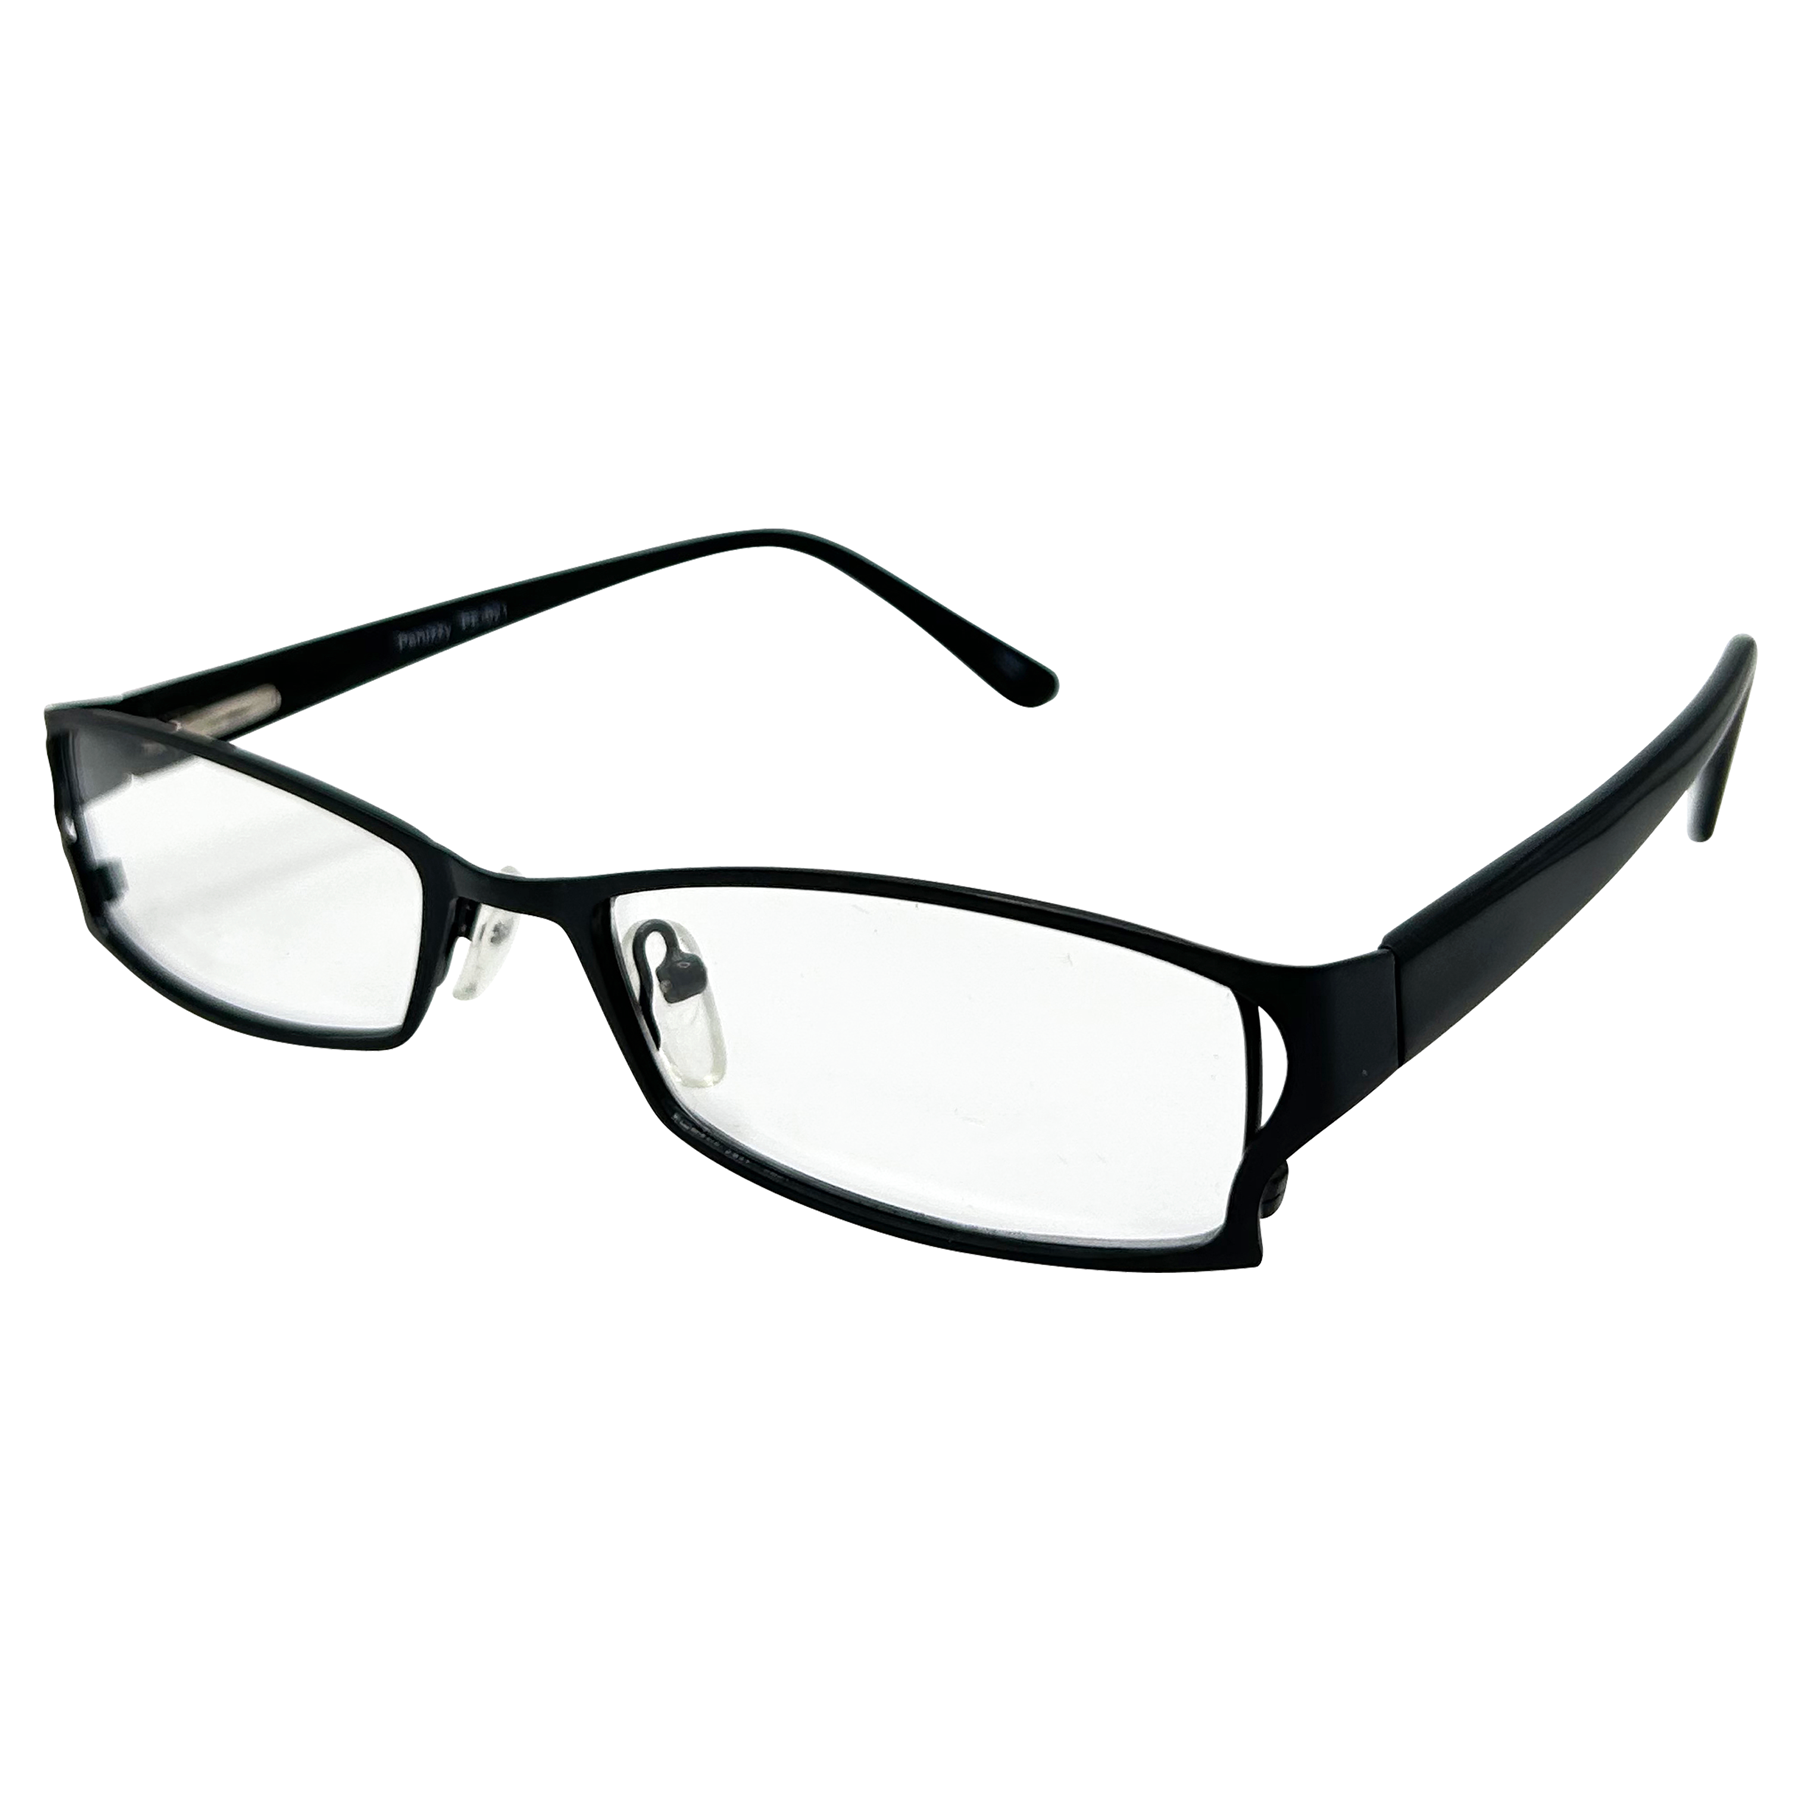 RIOT Small Clear Rectangular 90s Glasses